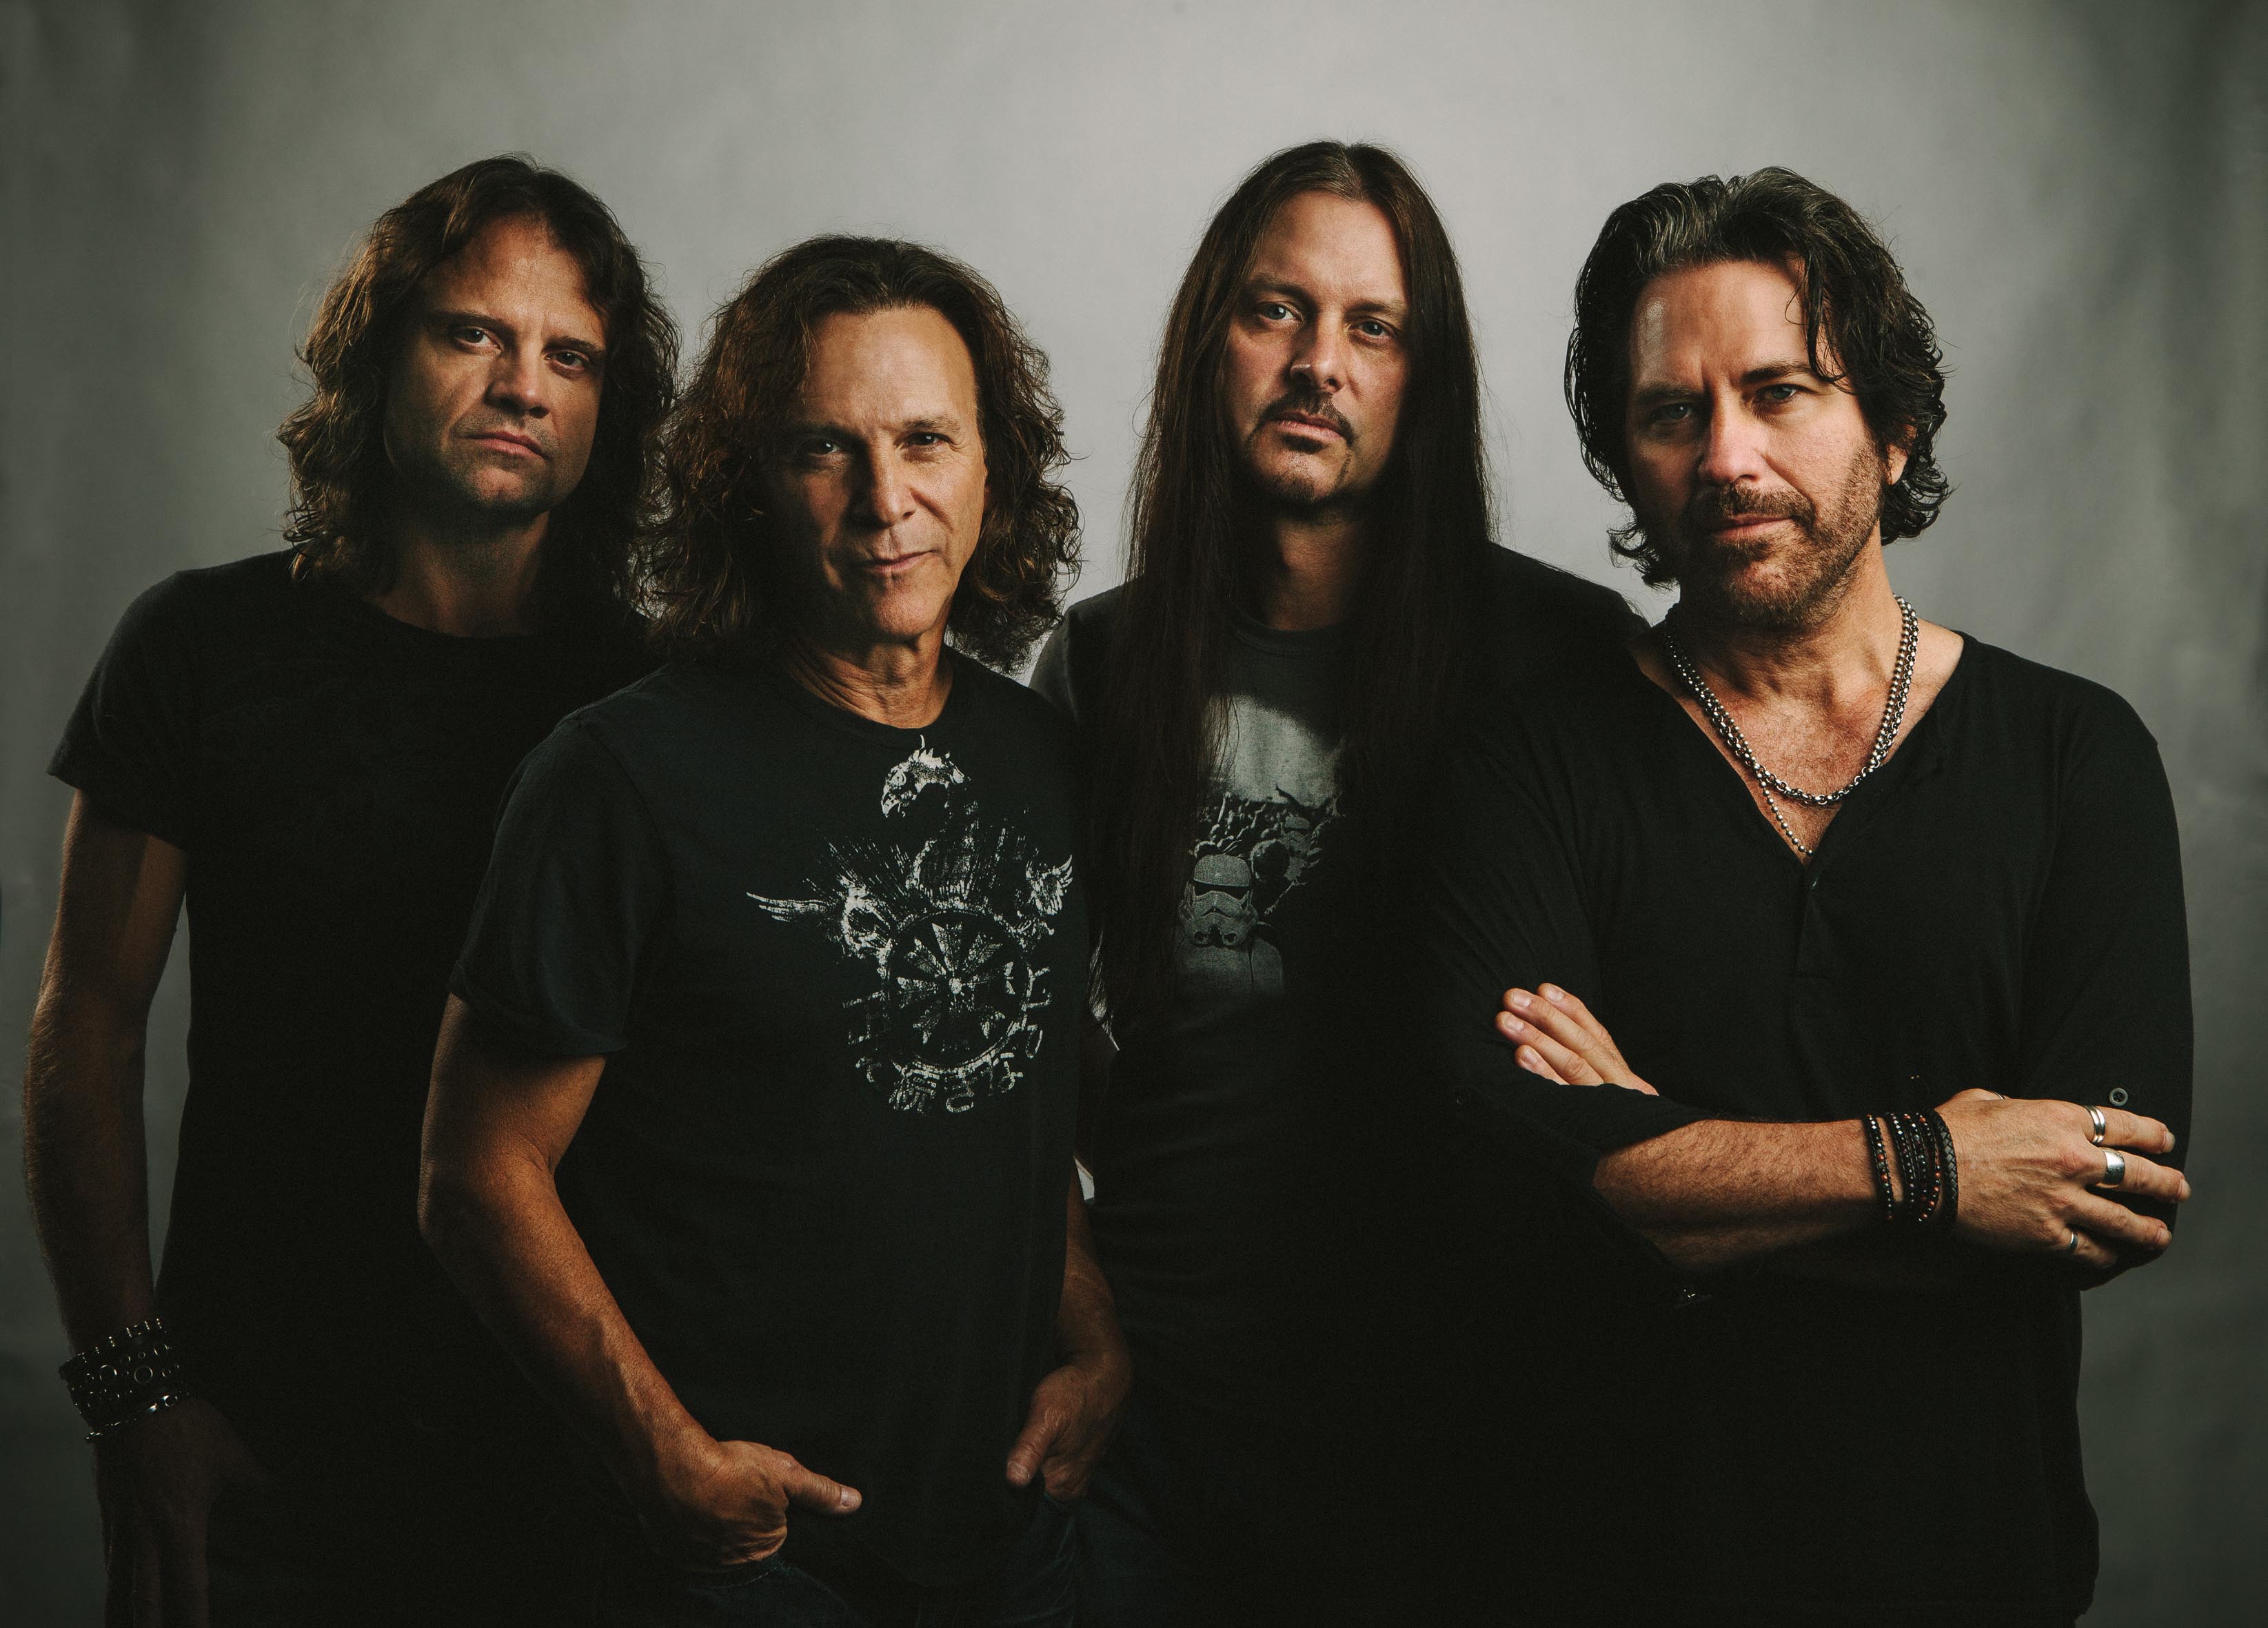 WINGER SET TO RELEASE ‘BETTER DAYS COMIN”, FIRST STUDIO ALBUM IN FIVE YEARS